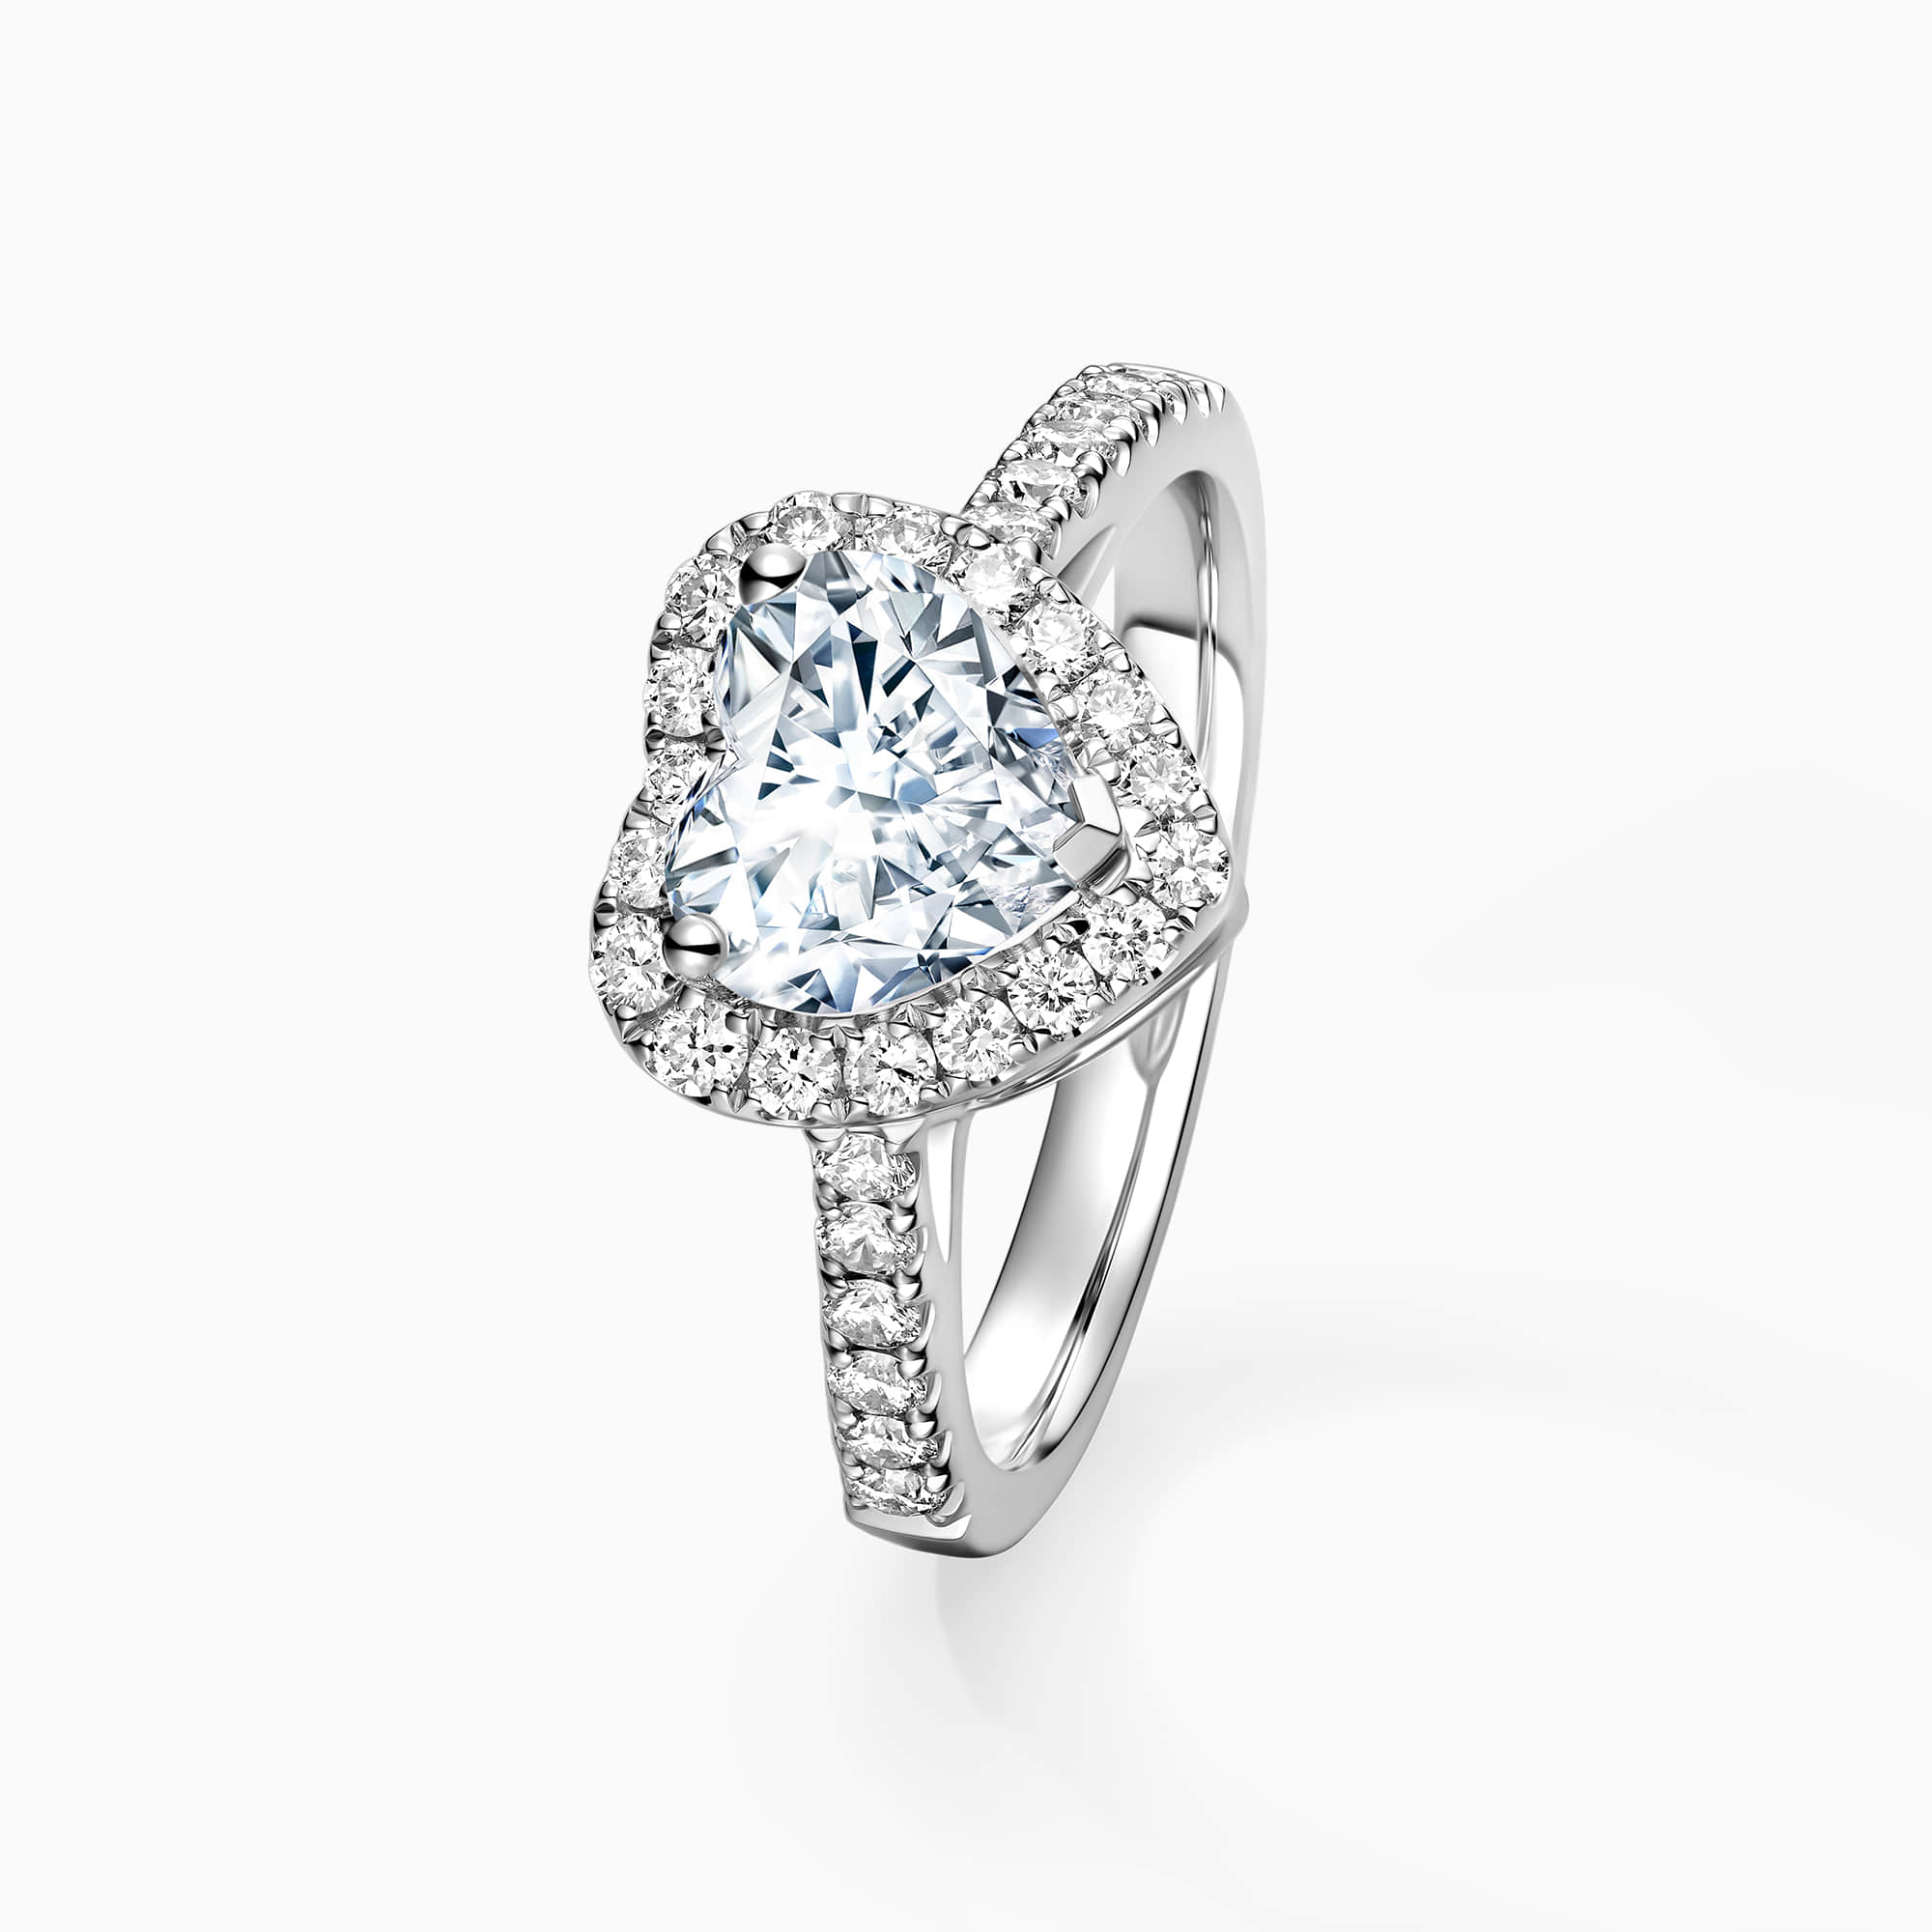 Darry Ring heart shaped engagement ring with halo angle view